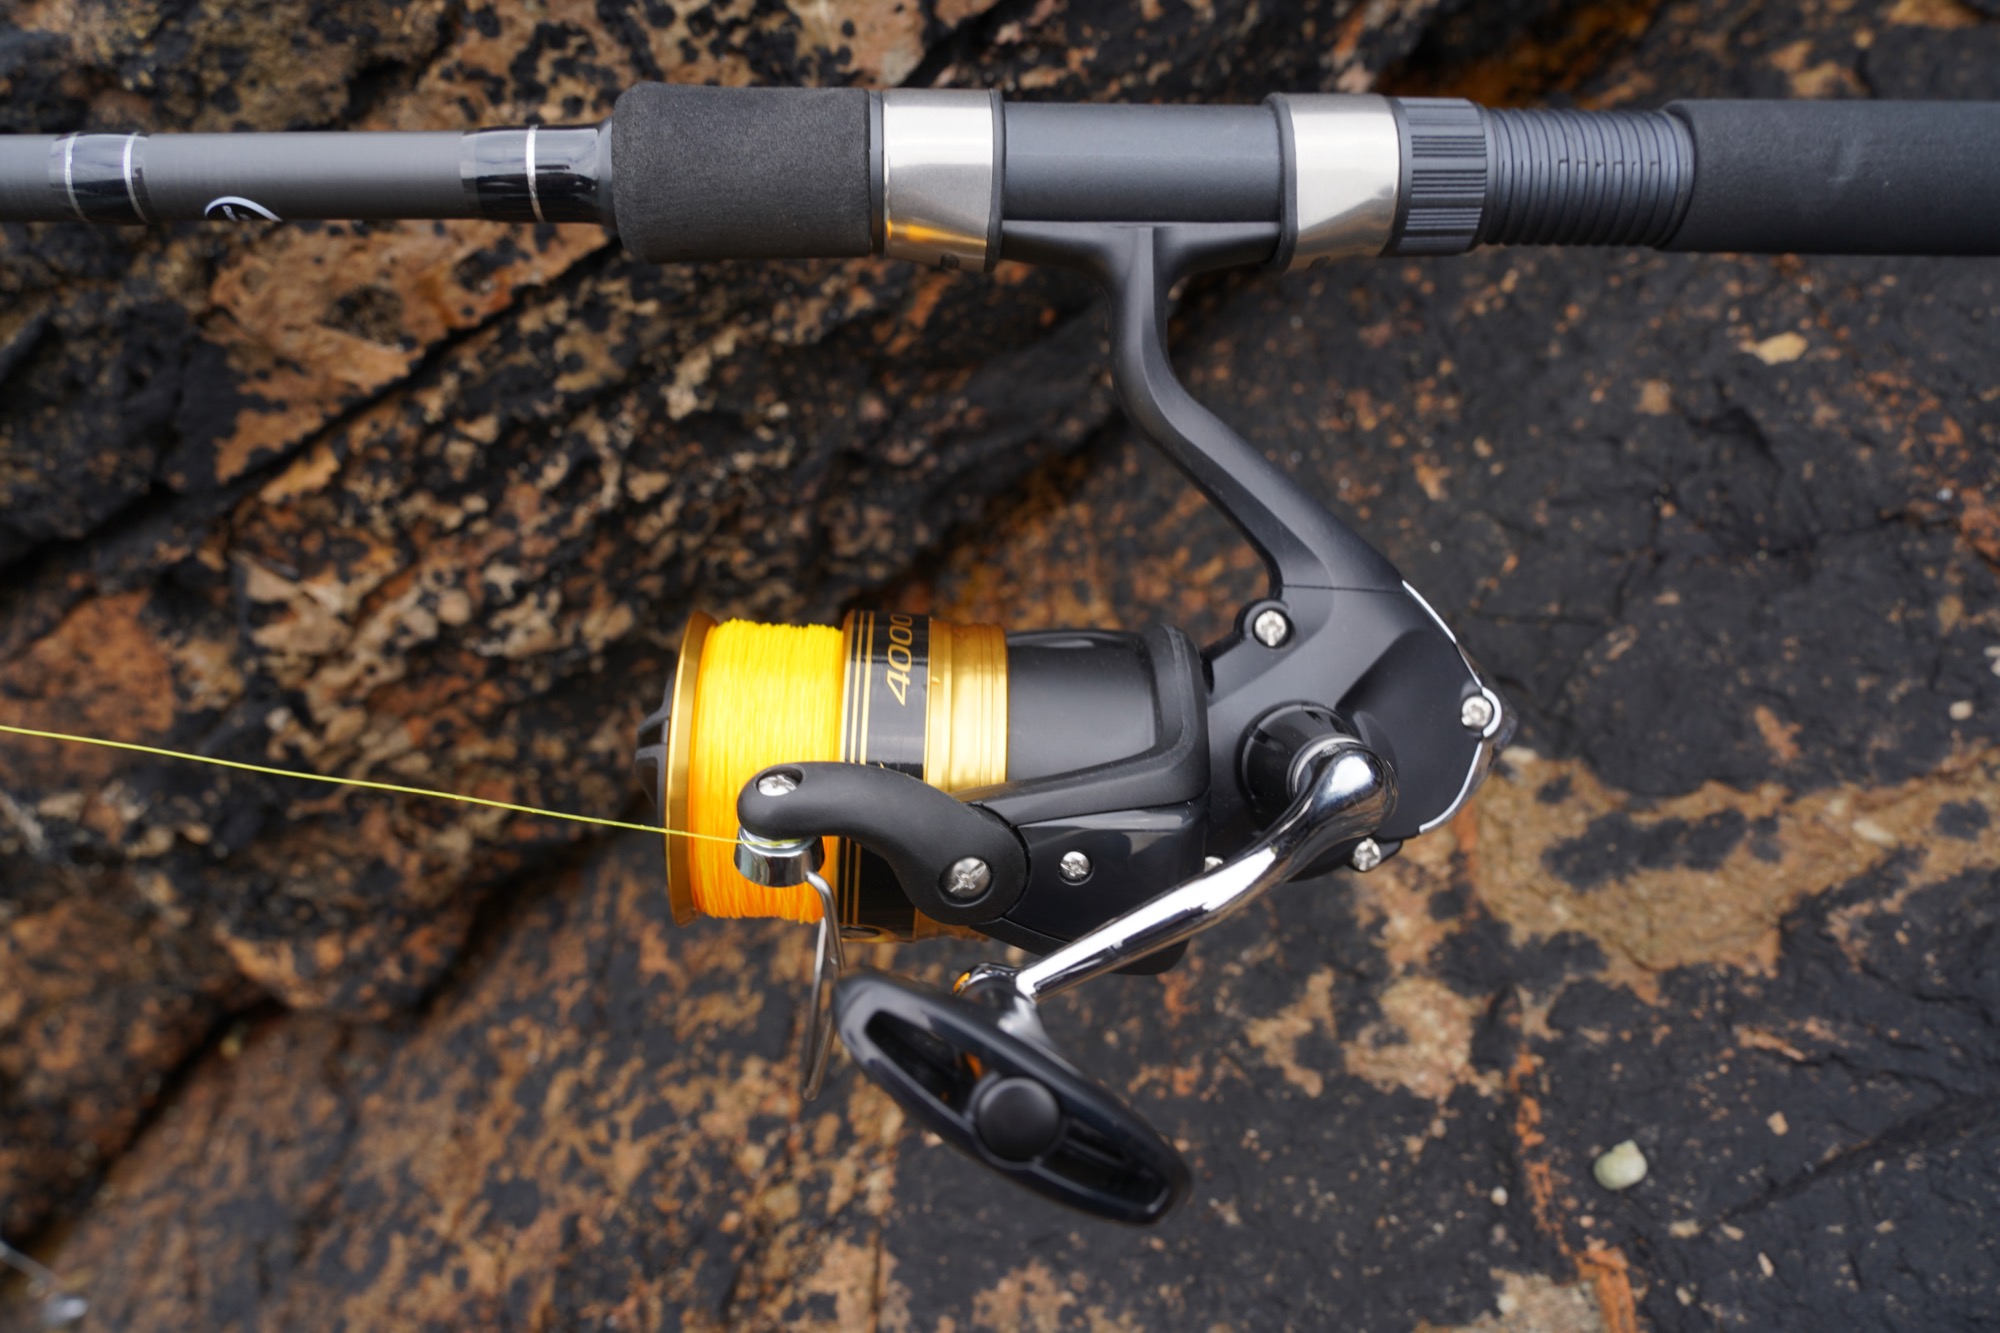 Shimano FX Rod & Reel Combo Review